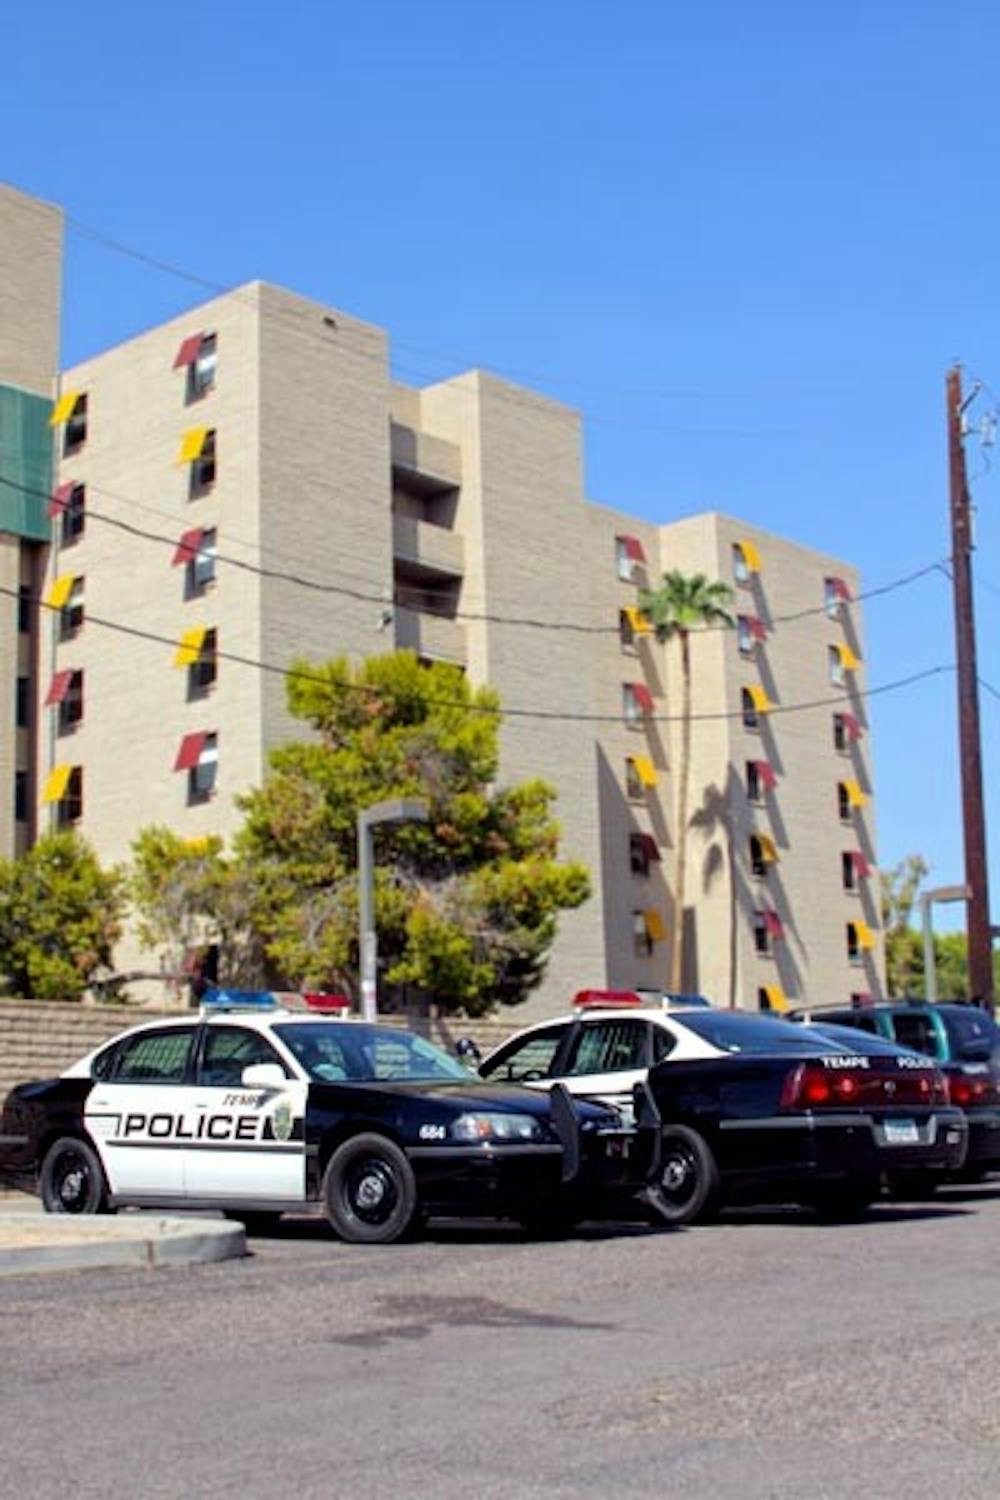 A SAFER CAMPUS: Tempe police keep a watchful eye over ASU dormitories, strengthening their surveillance over the campus's North, Center, and South neighborhoods. (Photo by Andy Jeffreys)